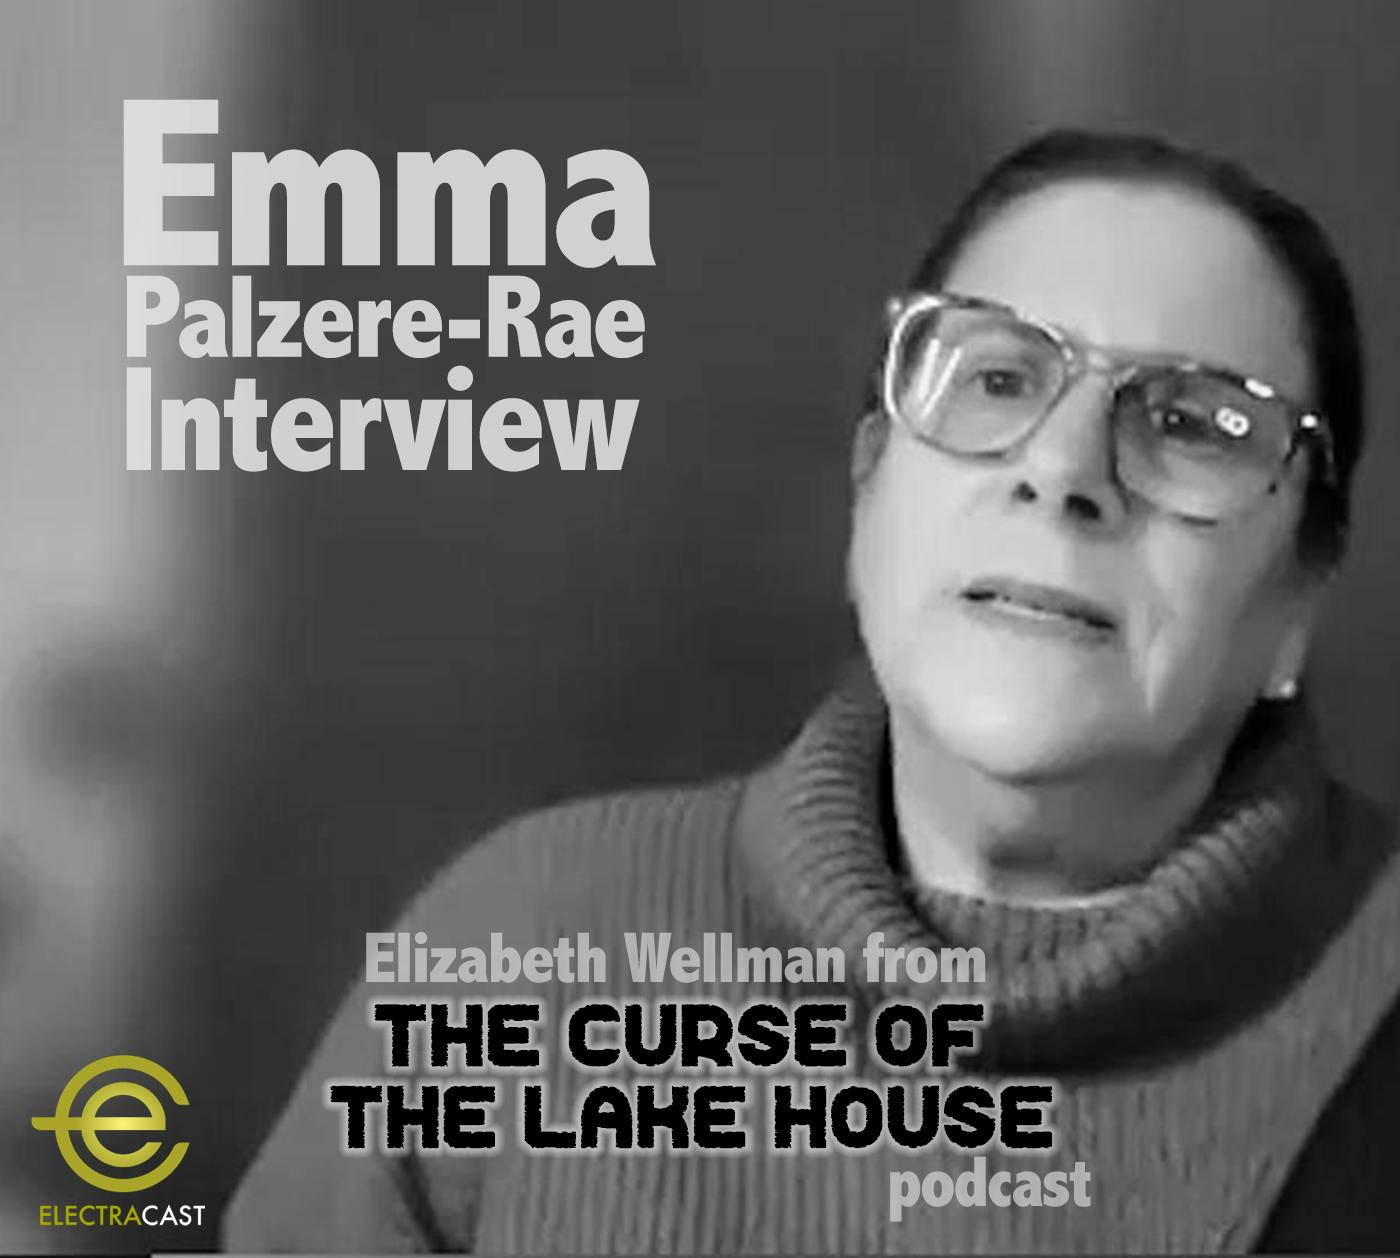 110. The Emma Palzere-Rae Interview